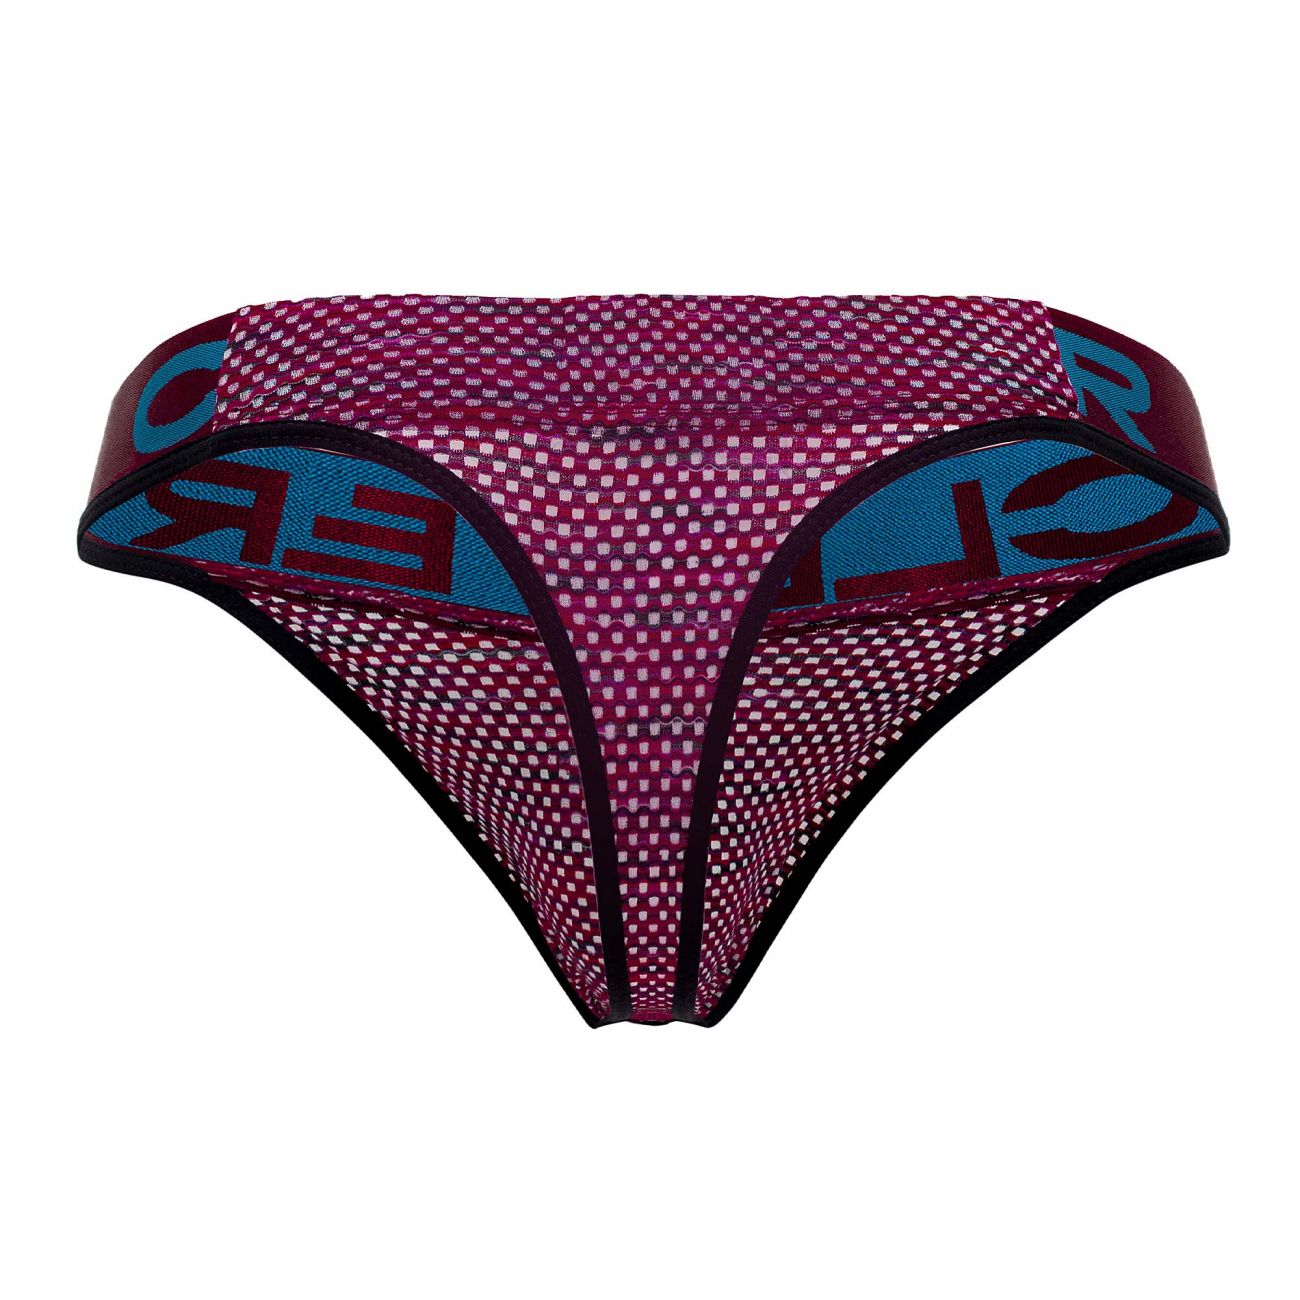 Clever 0553-1 Stefano Thongs Color Grape